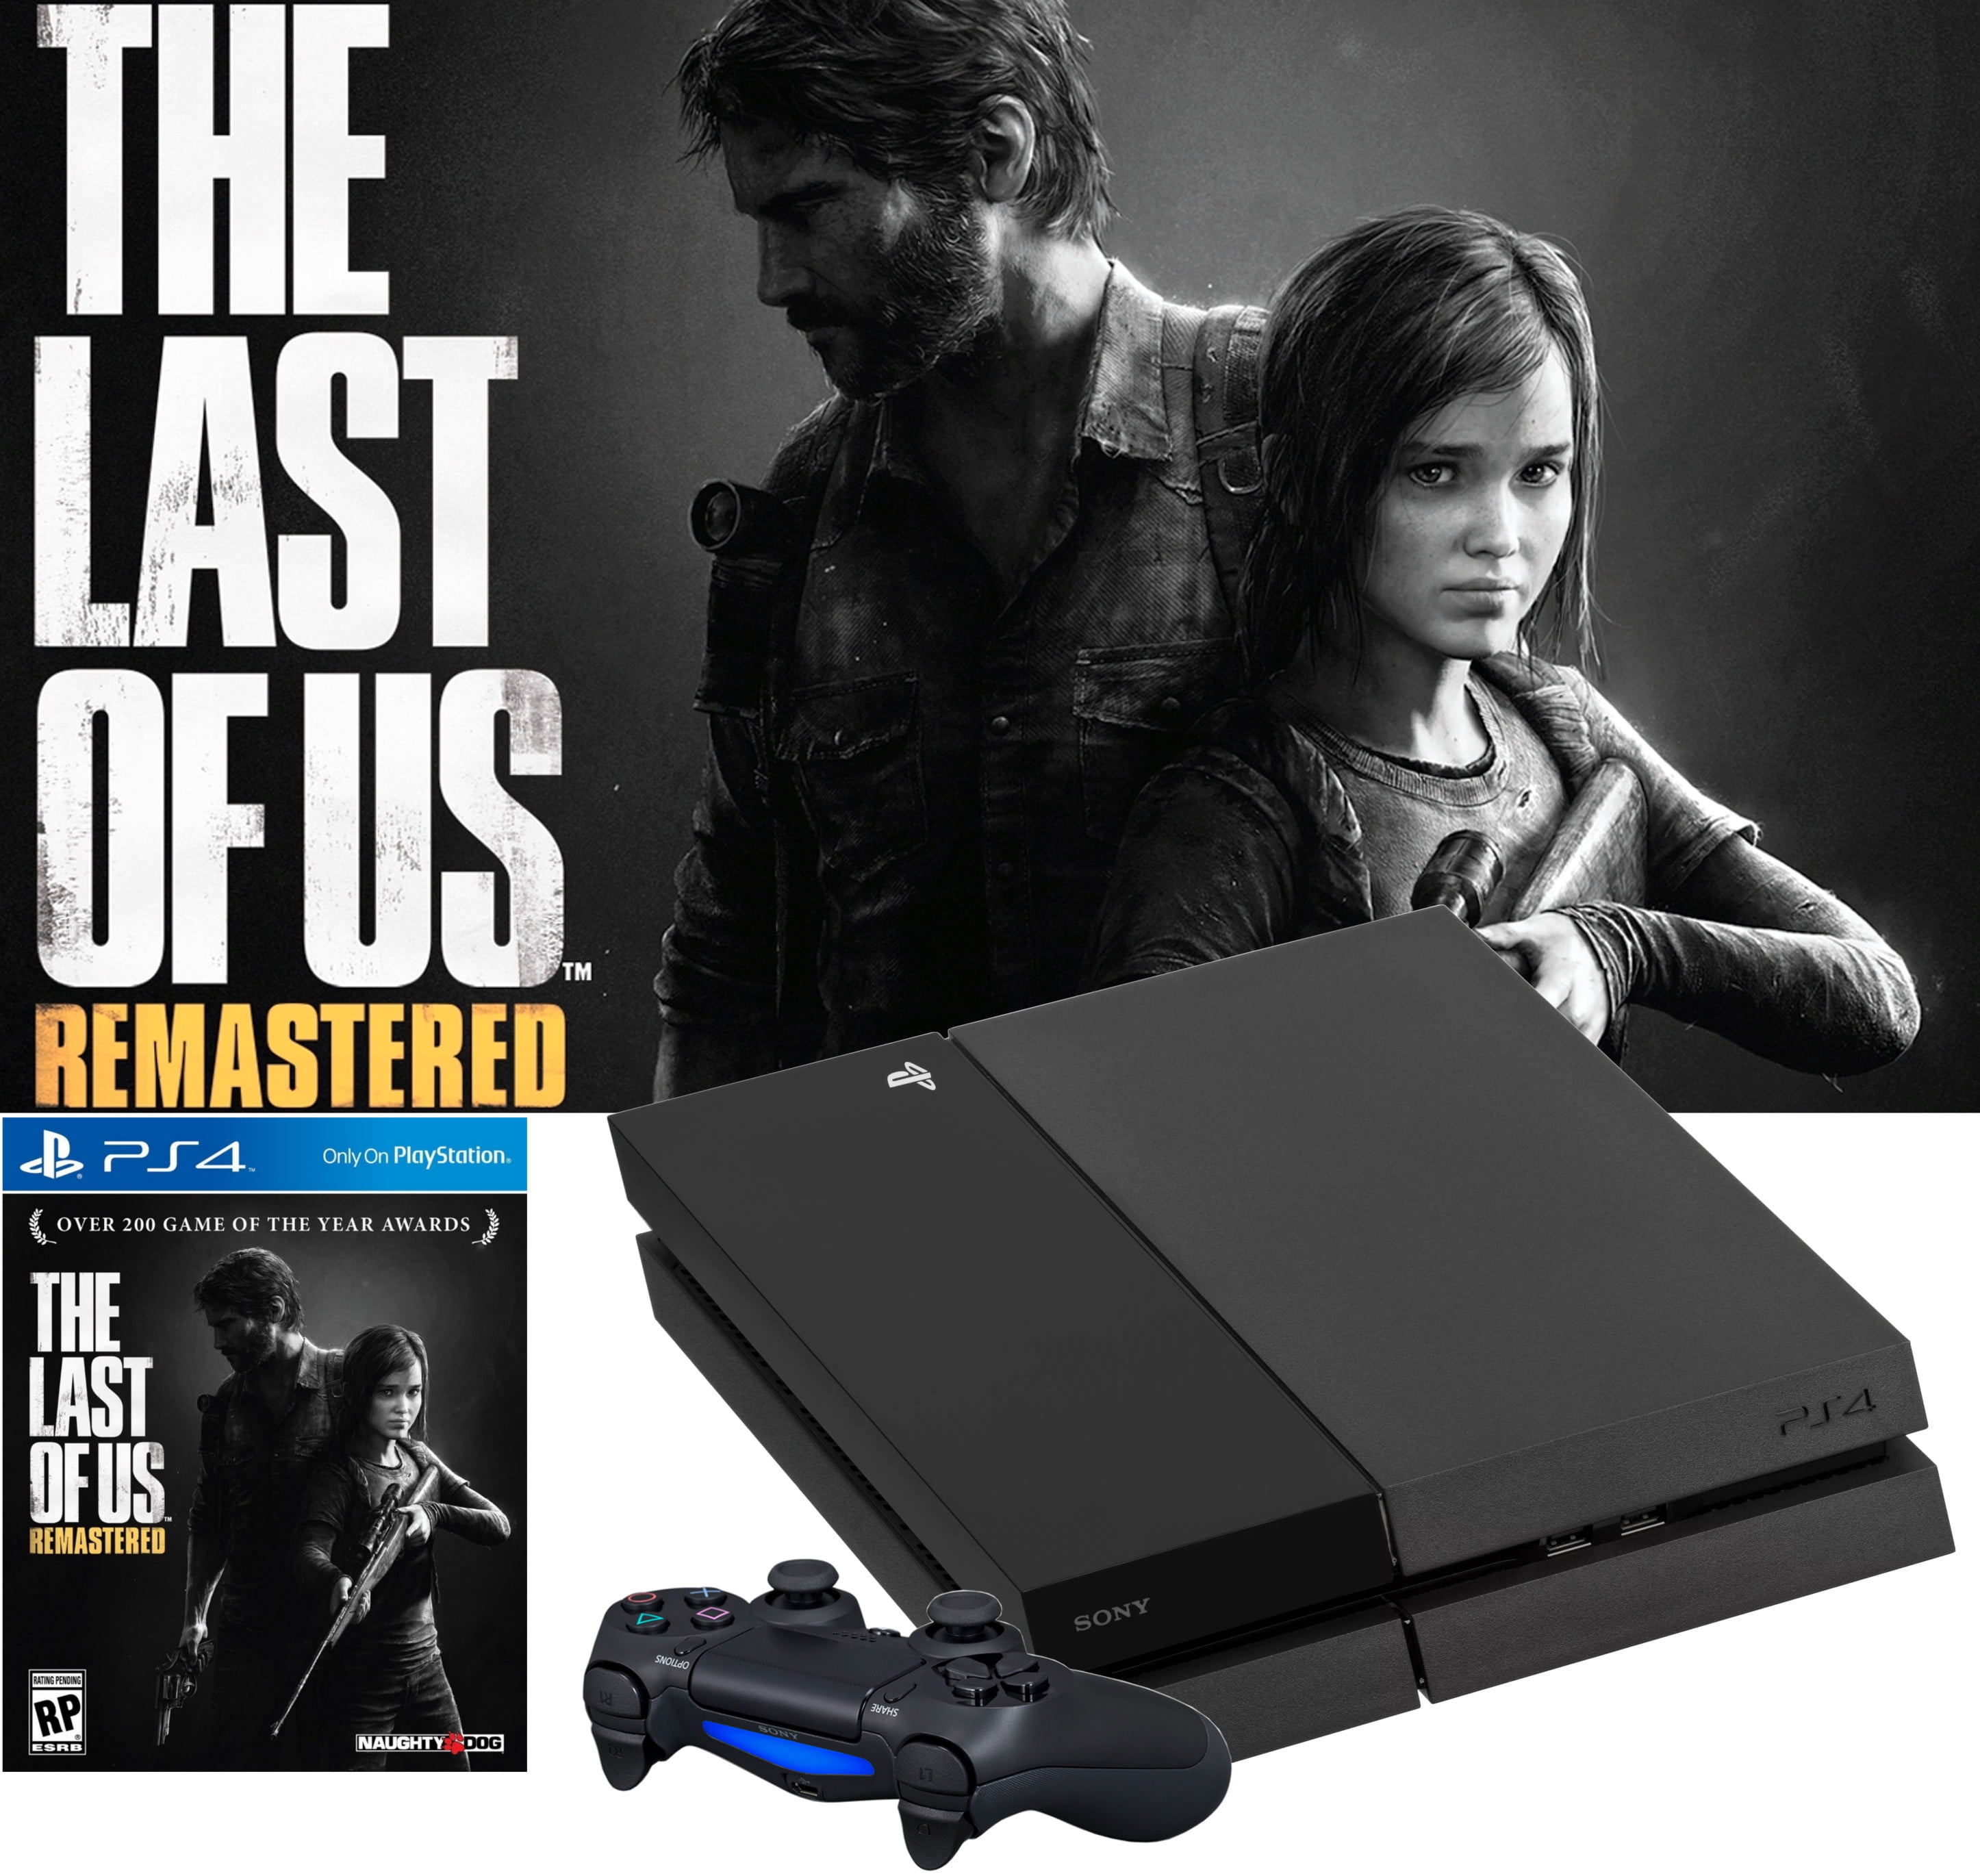 Jogo PS4 The Last Of Us - Remastered, SONY PLAYSTATION